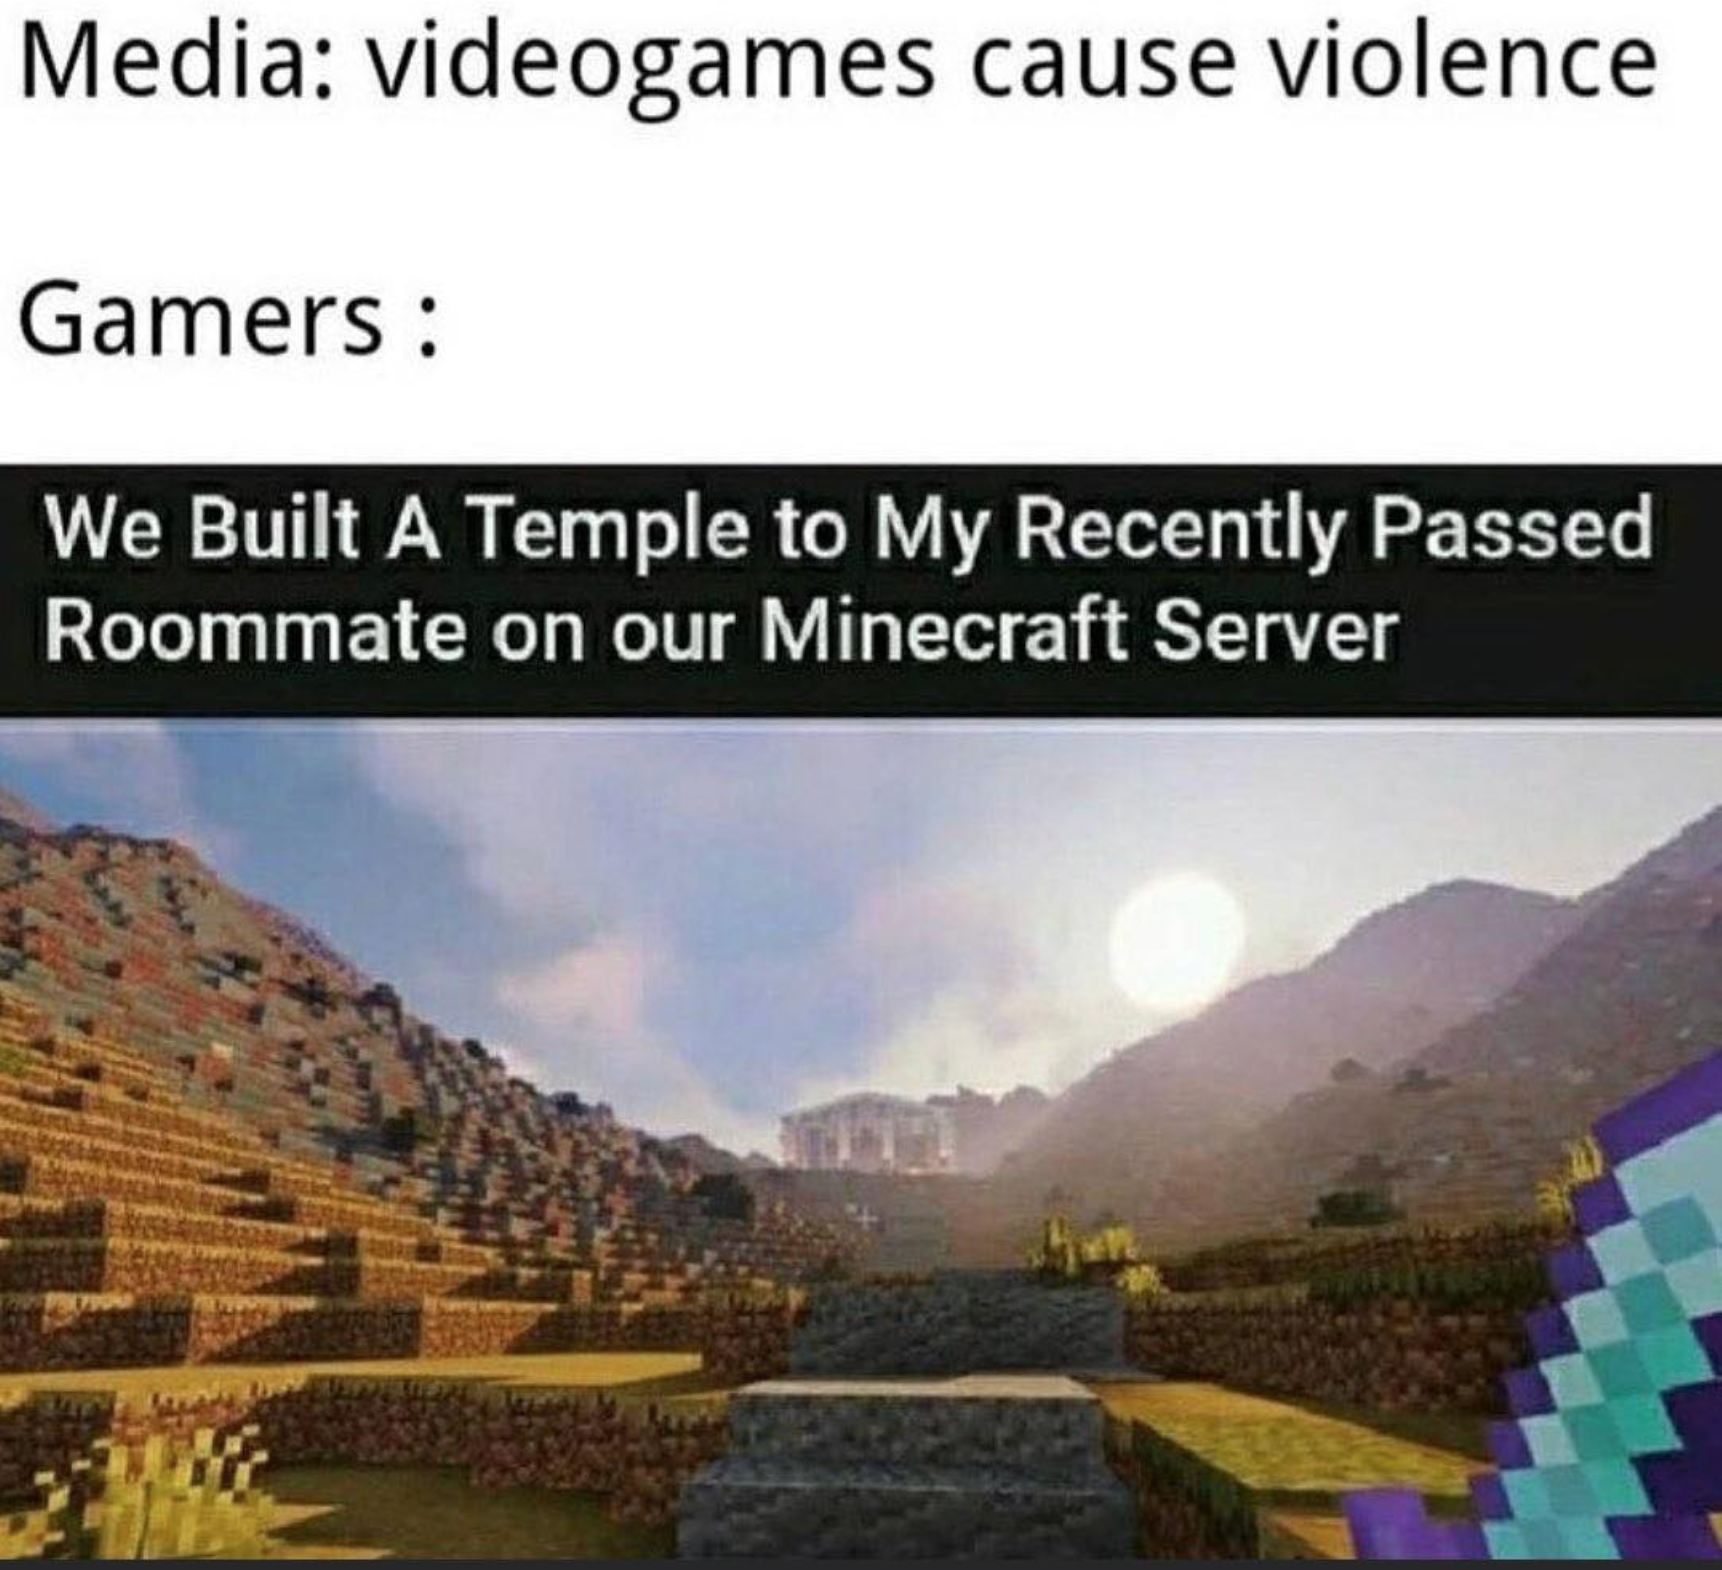 gaming memes - Media videogames cause violence Gamers We Built A Temple to My Recently passed Roommate on our Minecraft Server